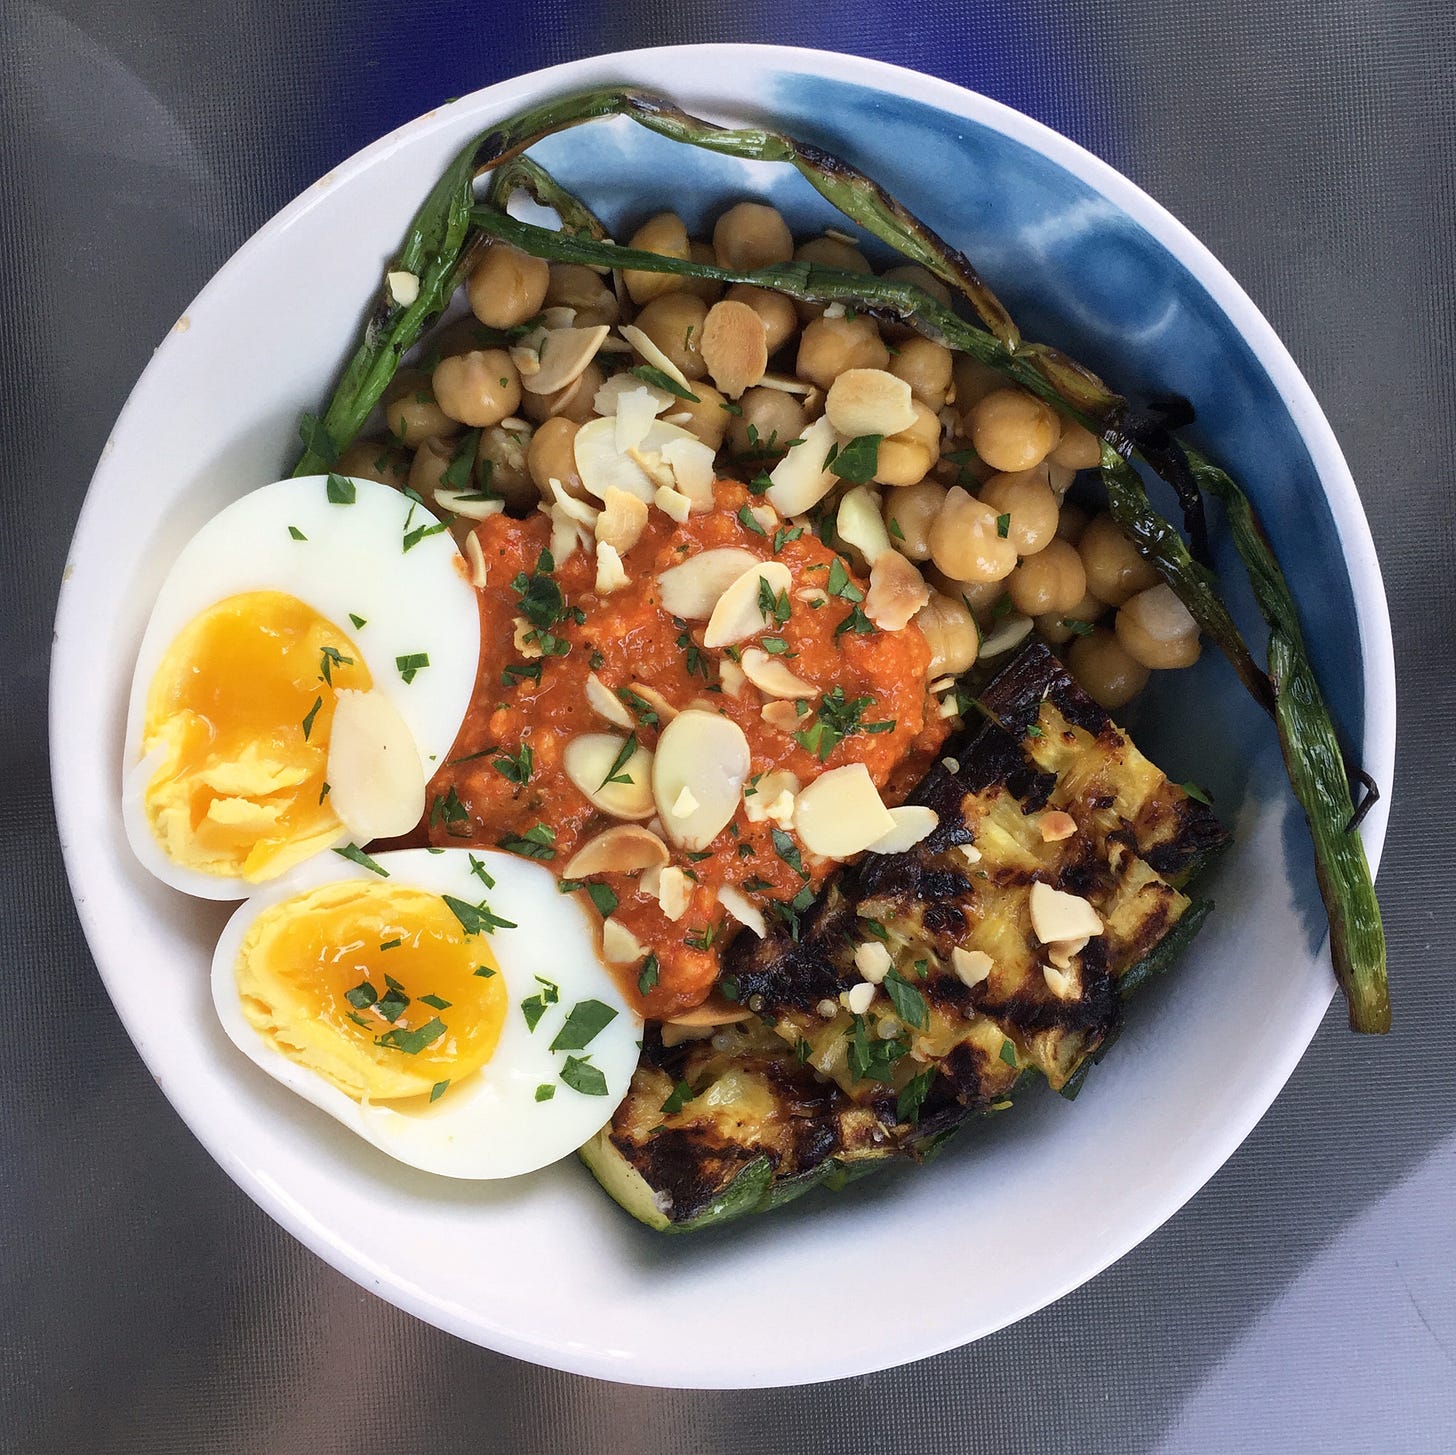 a white bowl with sections of chickpeas, grilled zucchini, and romesco sauce. a soft-boiled egg sliced in half sits to the left, and a charred green onion encircles the top of the bowl. toasted almonds and chopped parsley are scattered on top.